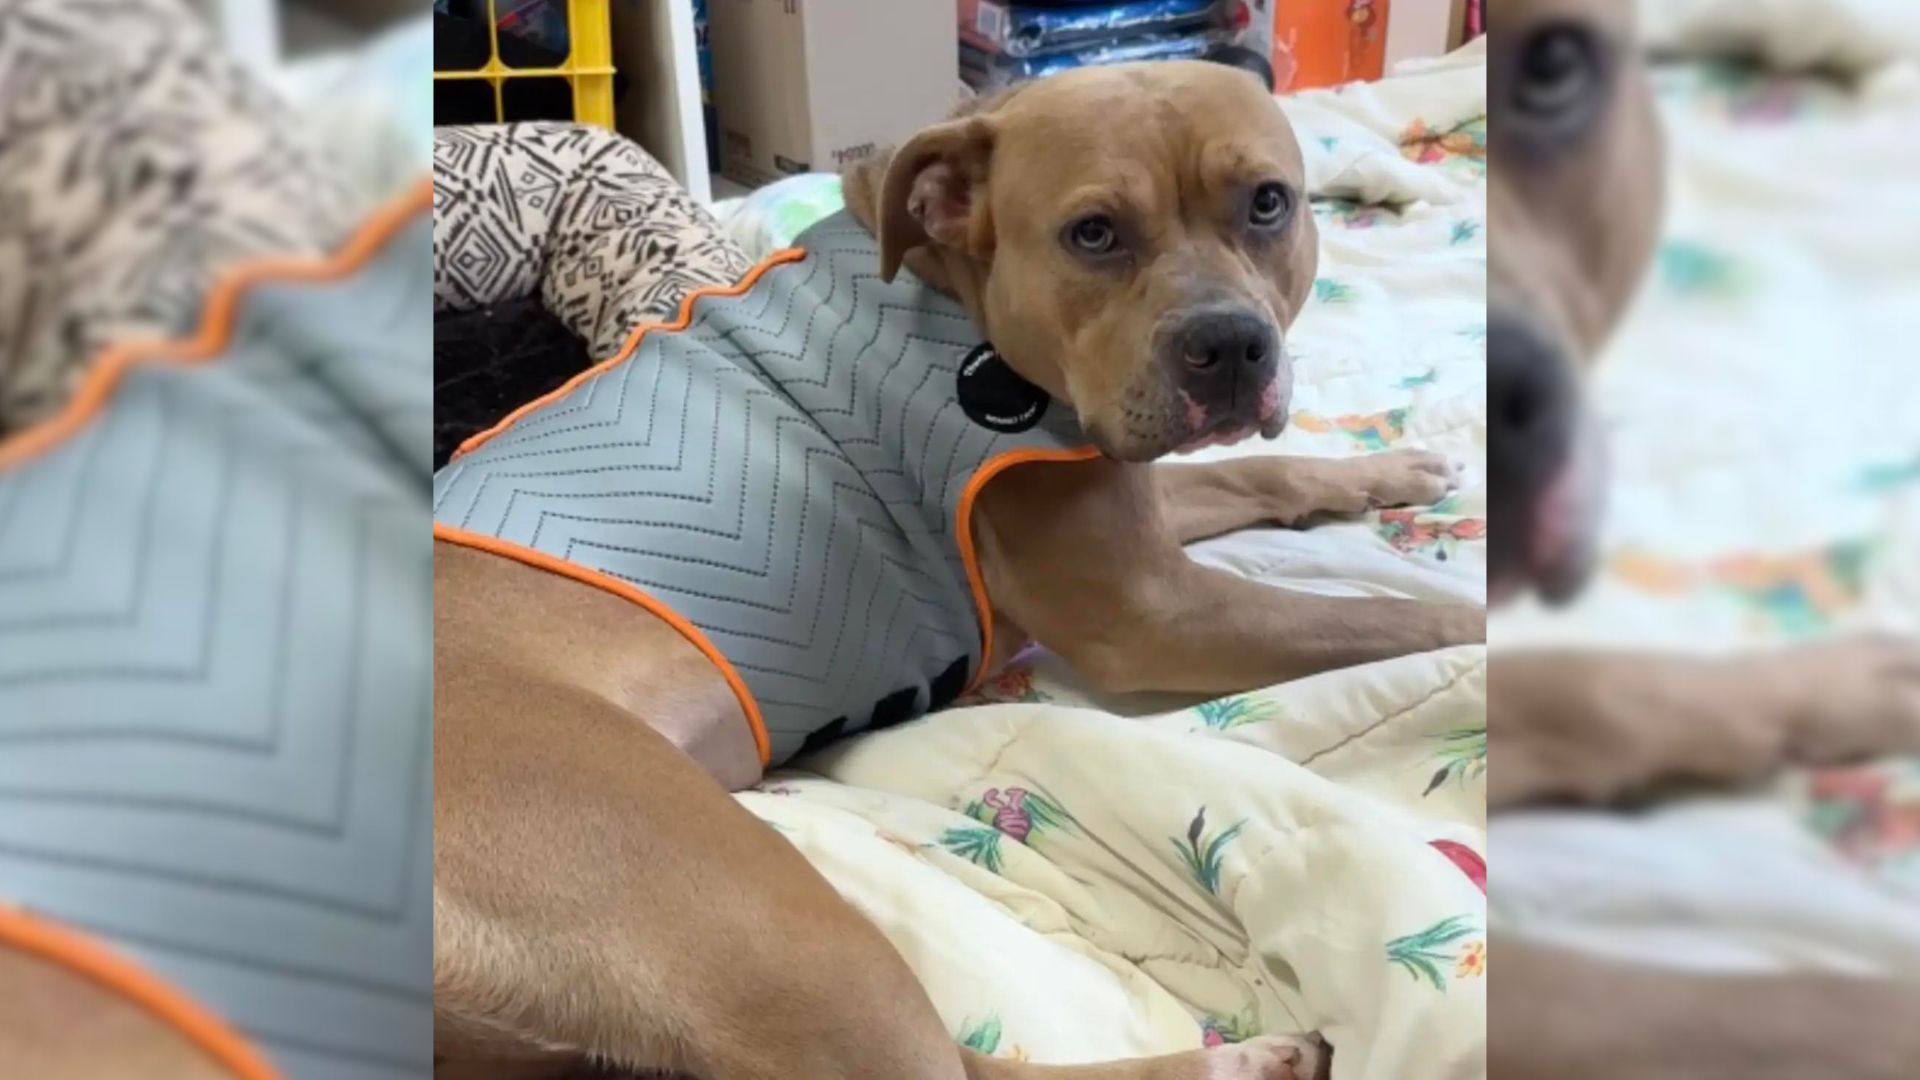 Rescuers Find Creative Way To Help Traumatized Pittie Leave Kennel For The First Time